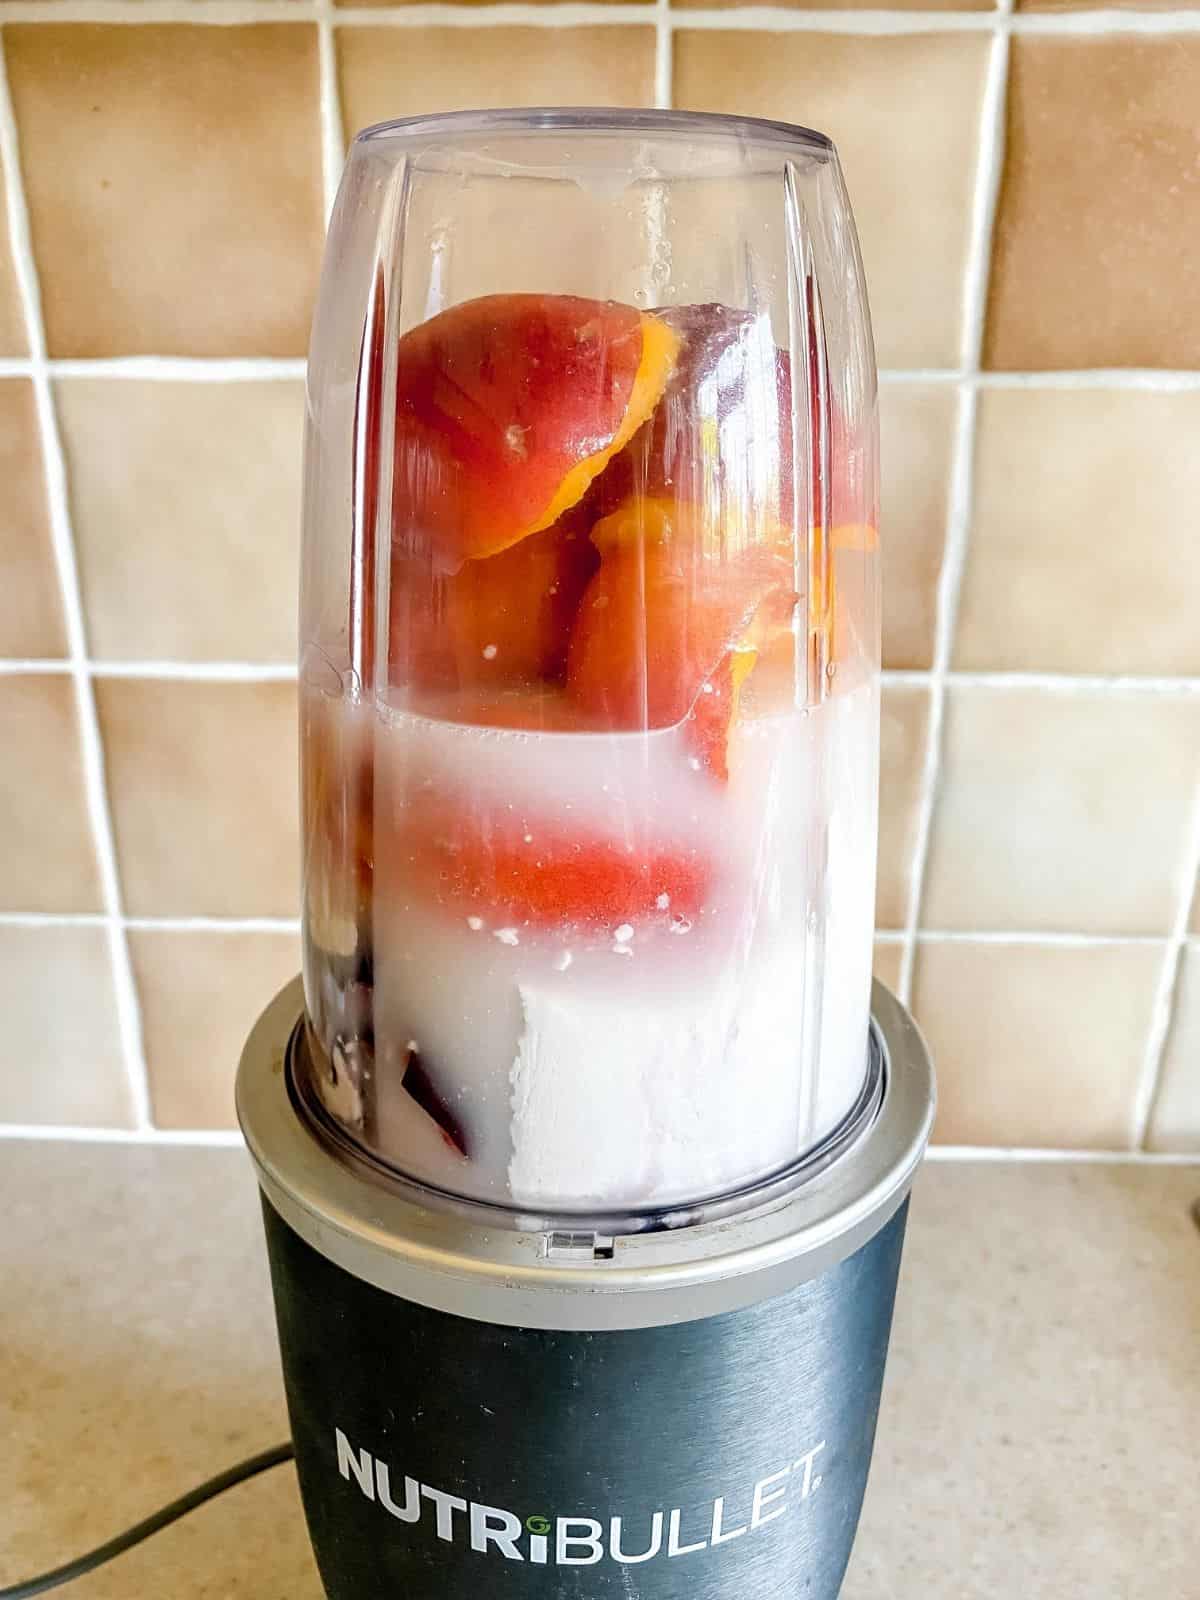 peaches and coconut milk in a Nutri-Bullet.